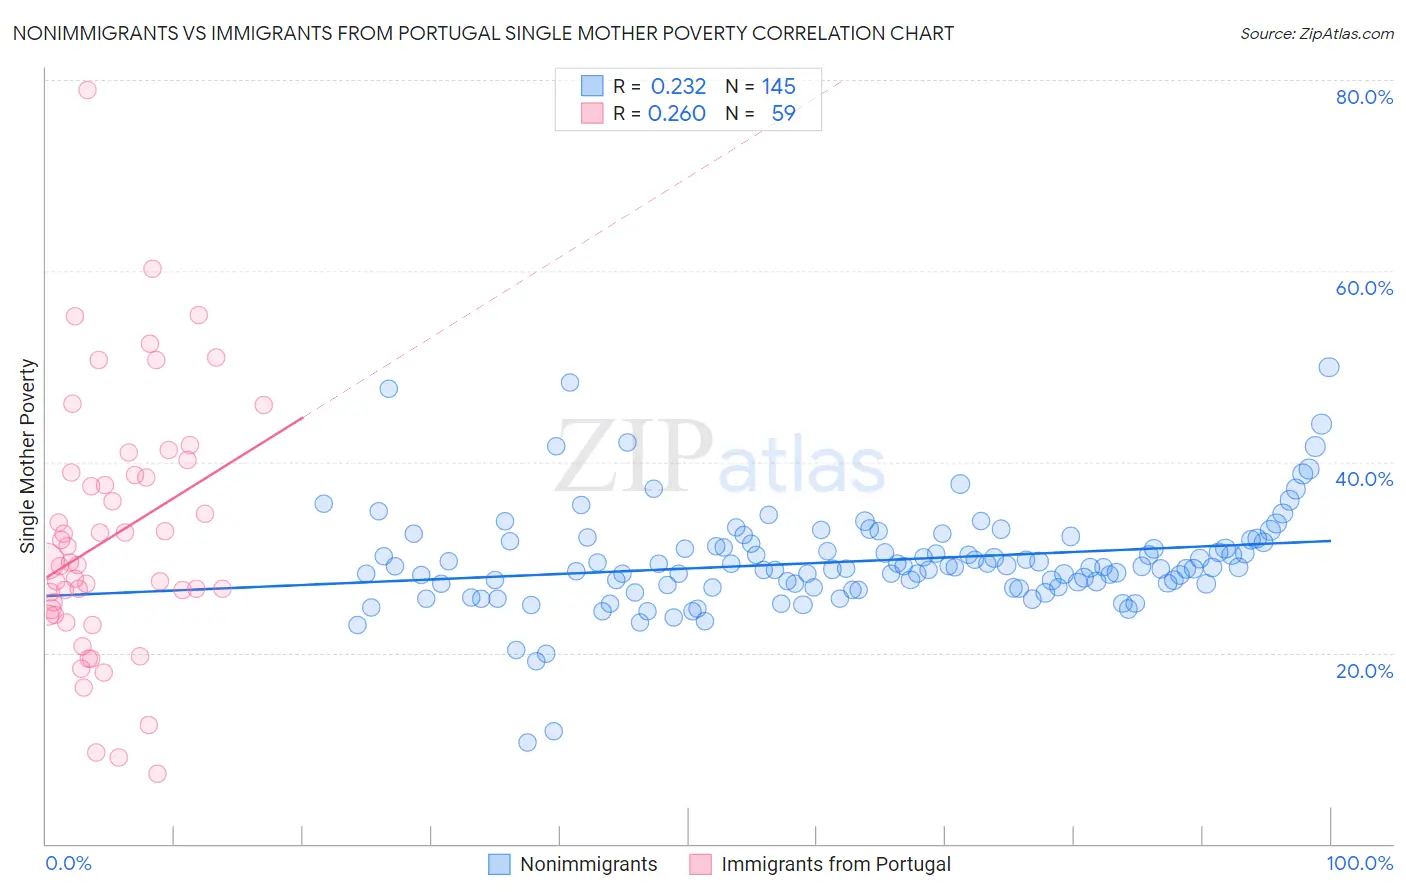 Nonimmigrants vs Immigrants from Portugal Single Mother Poverty